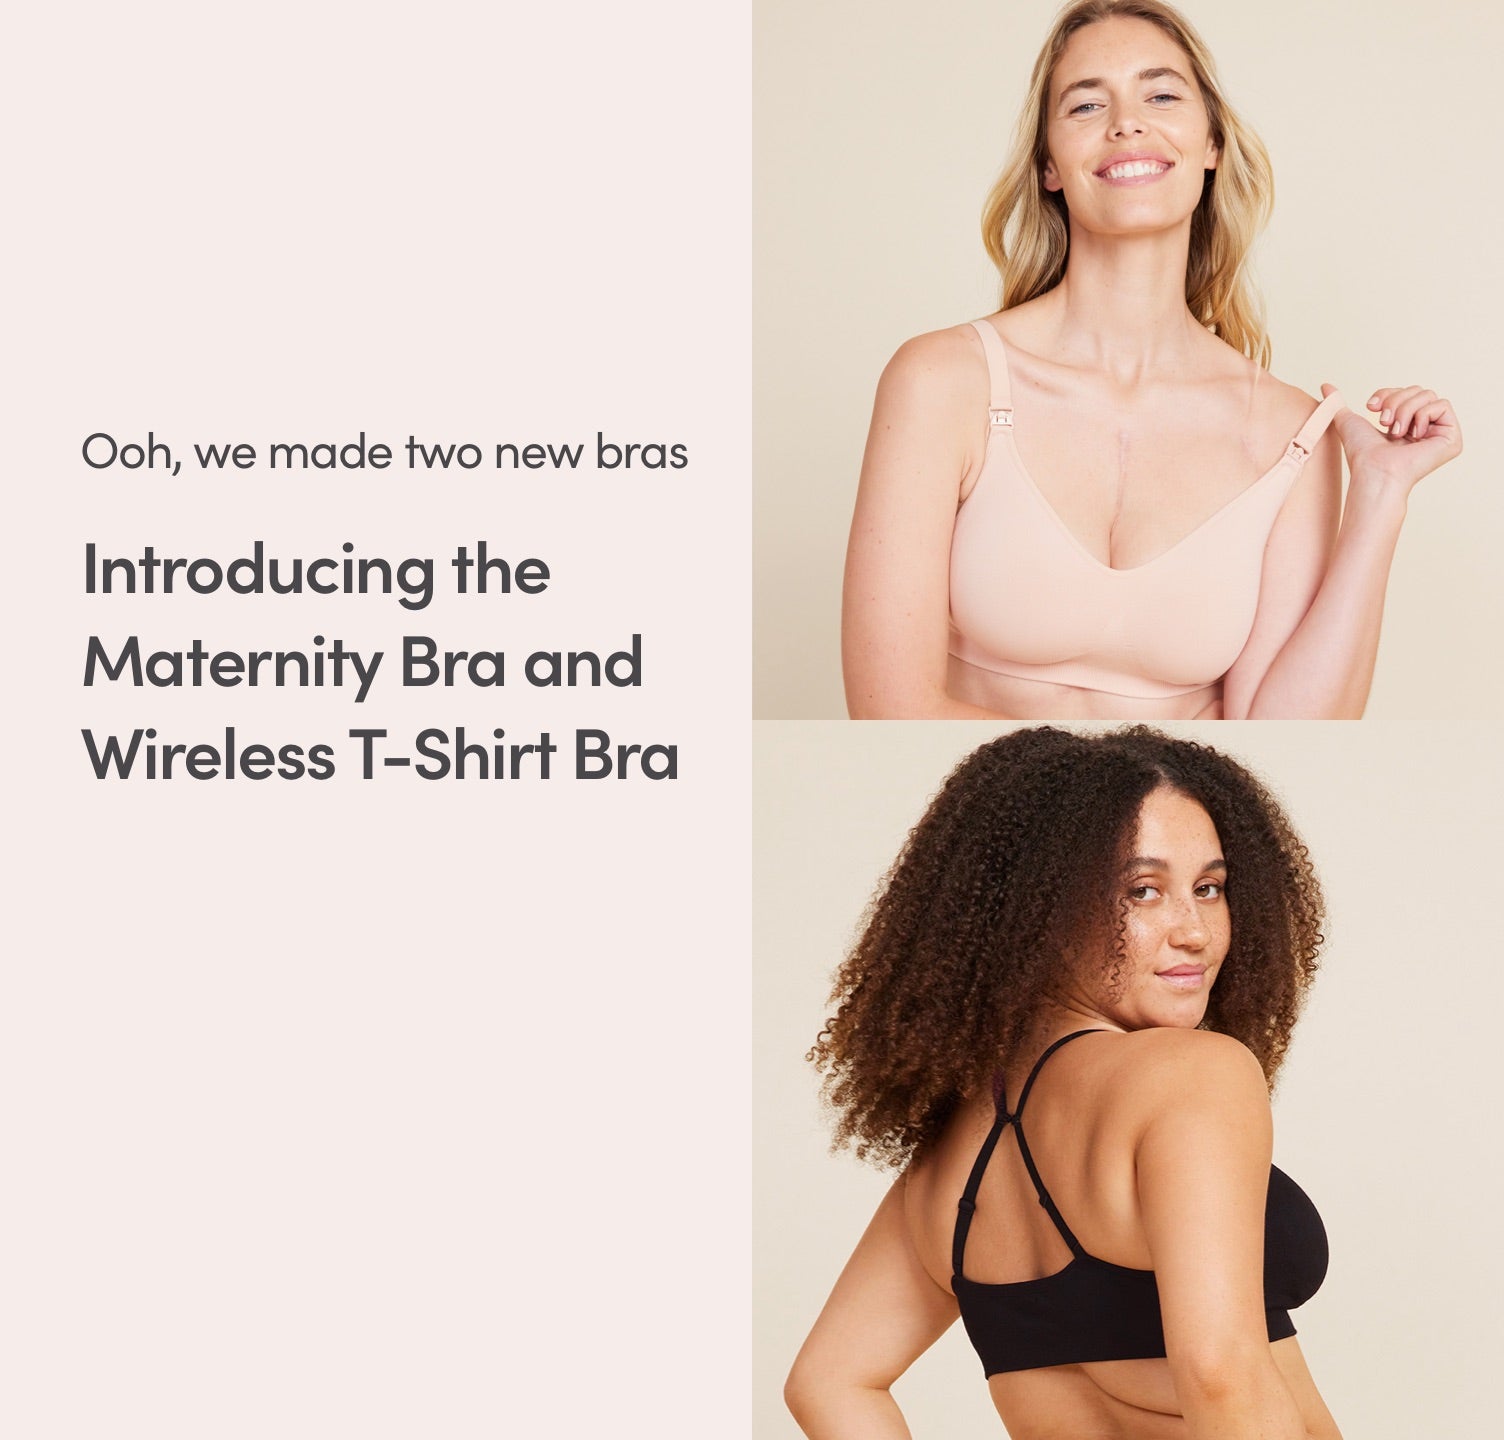 Introducing two new bras